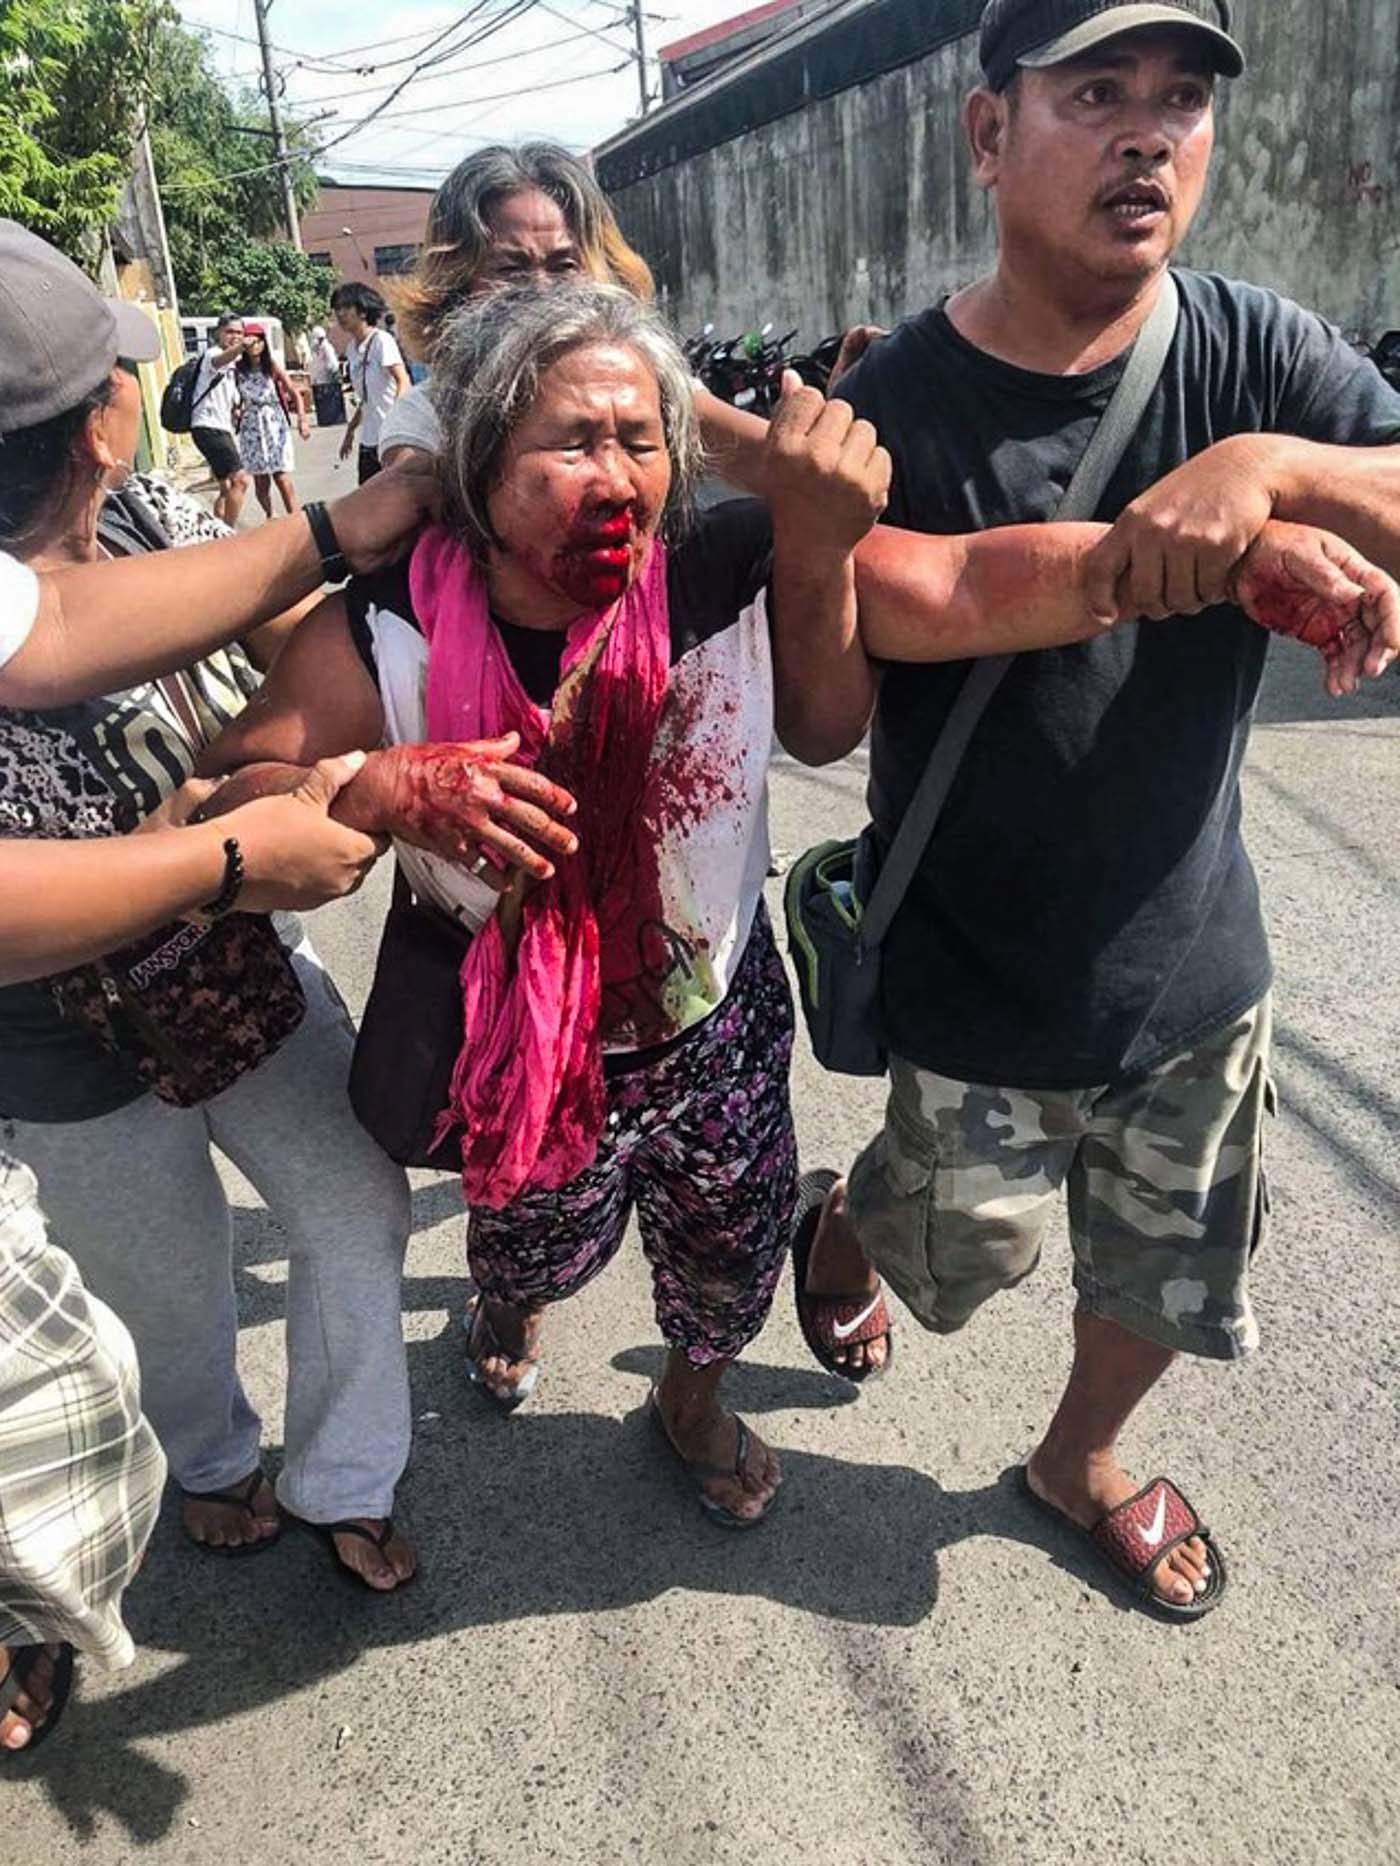 CASUALTY. Striking workers carry an elderly who was hurt after a violence erupted at the picketline of the NutriAsia plant in Marilao, Bulacan on July 30, 2018. Photo courtesy of Anakbayan  